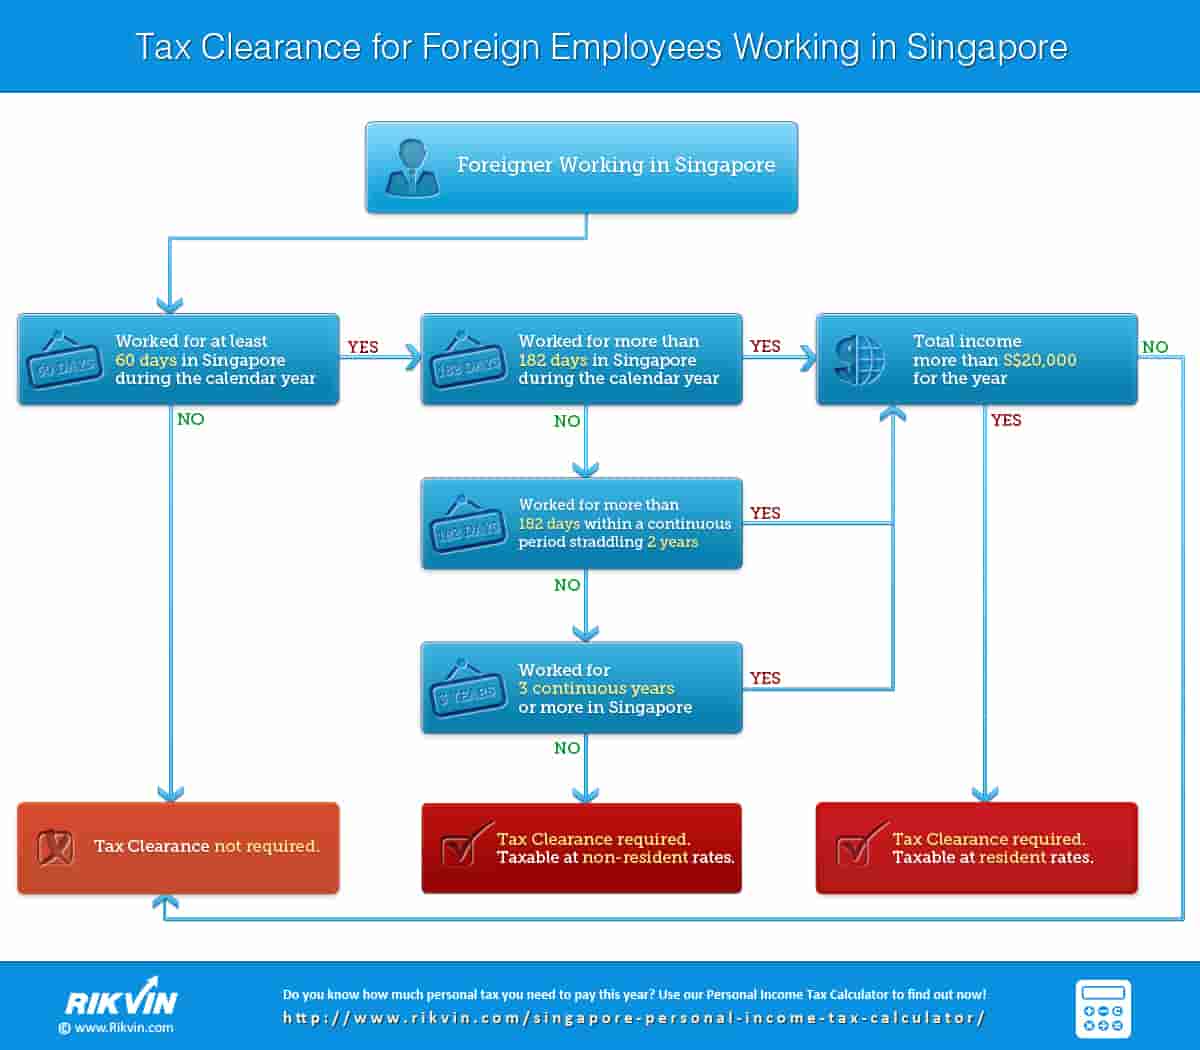 Flowchart on Requirements of Tax Clearance for Foreign Employees Working in Singapore